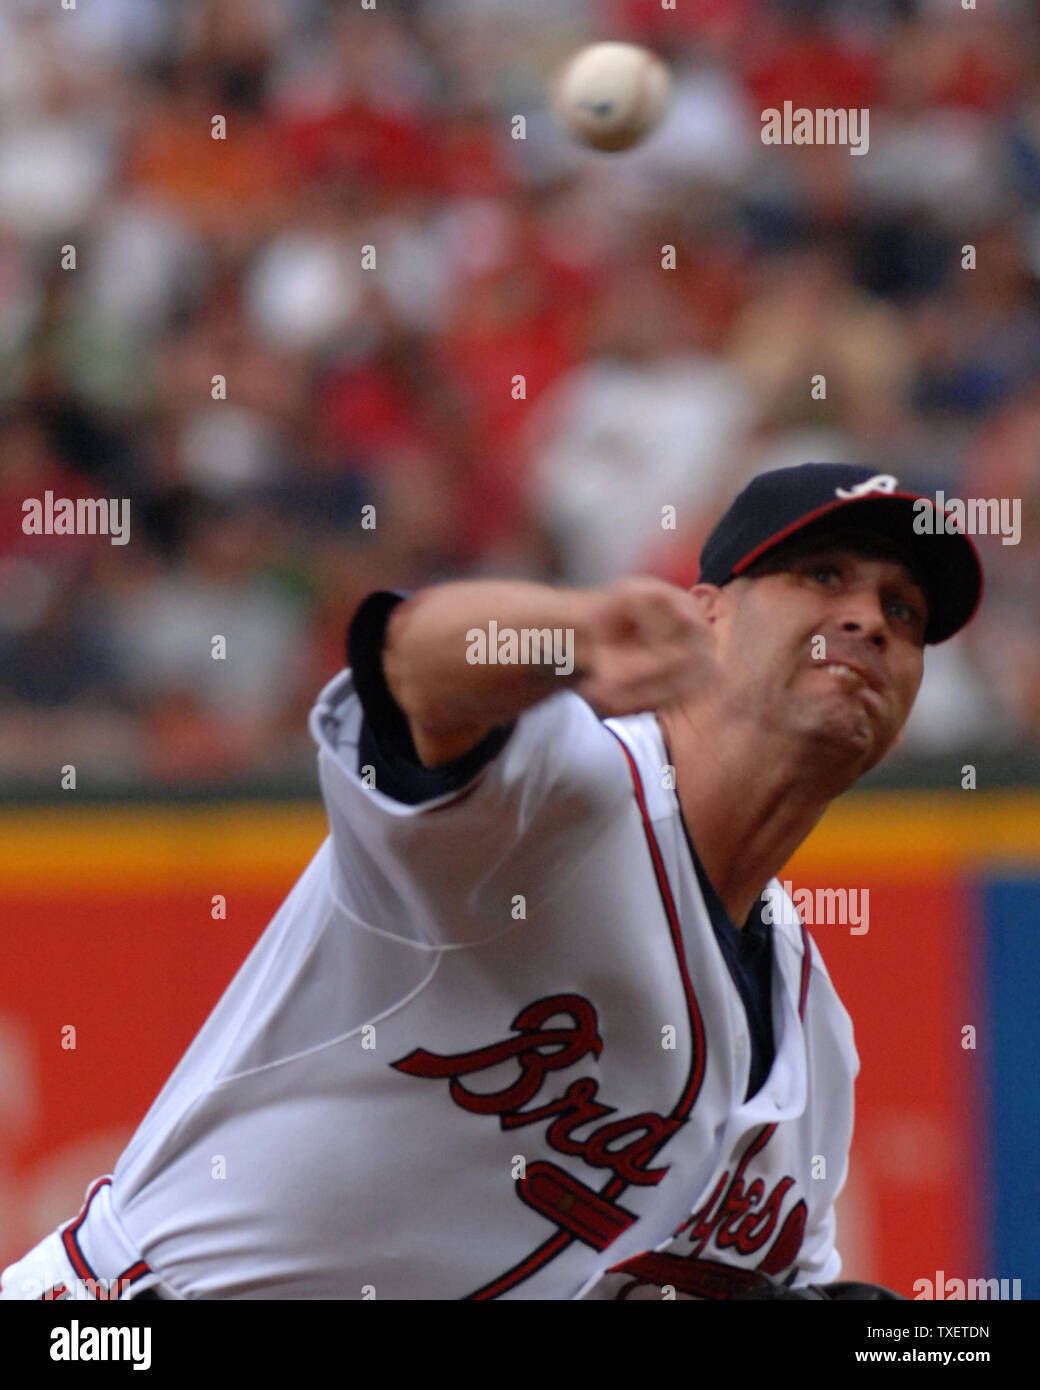 Atlanta Braves starting pitcher Tim Hudson throws against the visiting Boston Red Sox in the first inning at Turner Field in Atlanta on June 19, 2007. (UPI Photo/John Dickerson) Stock Photo